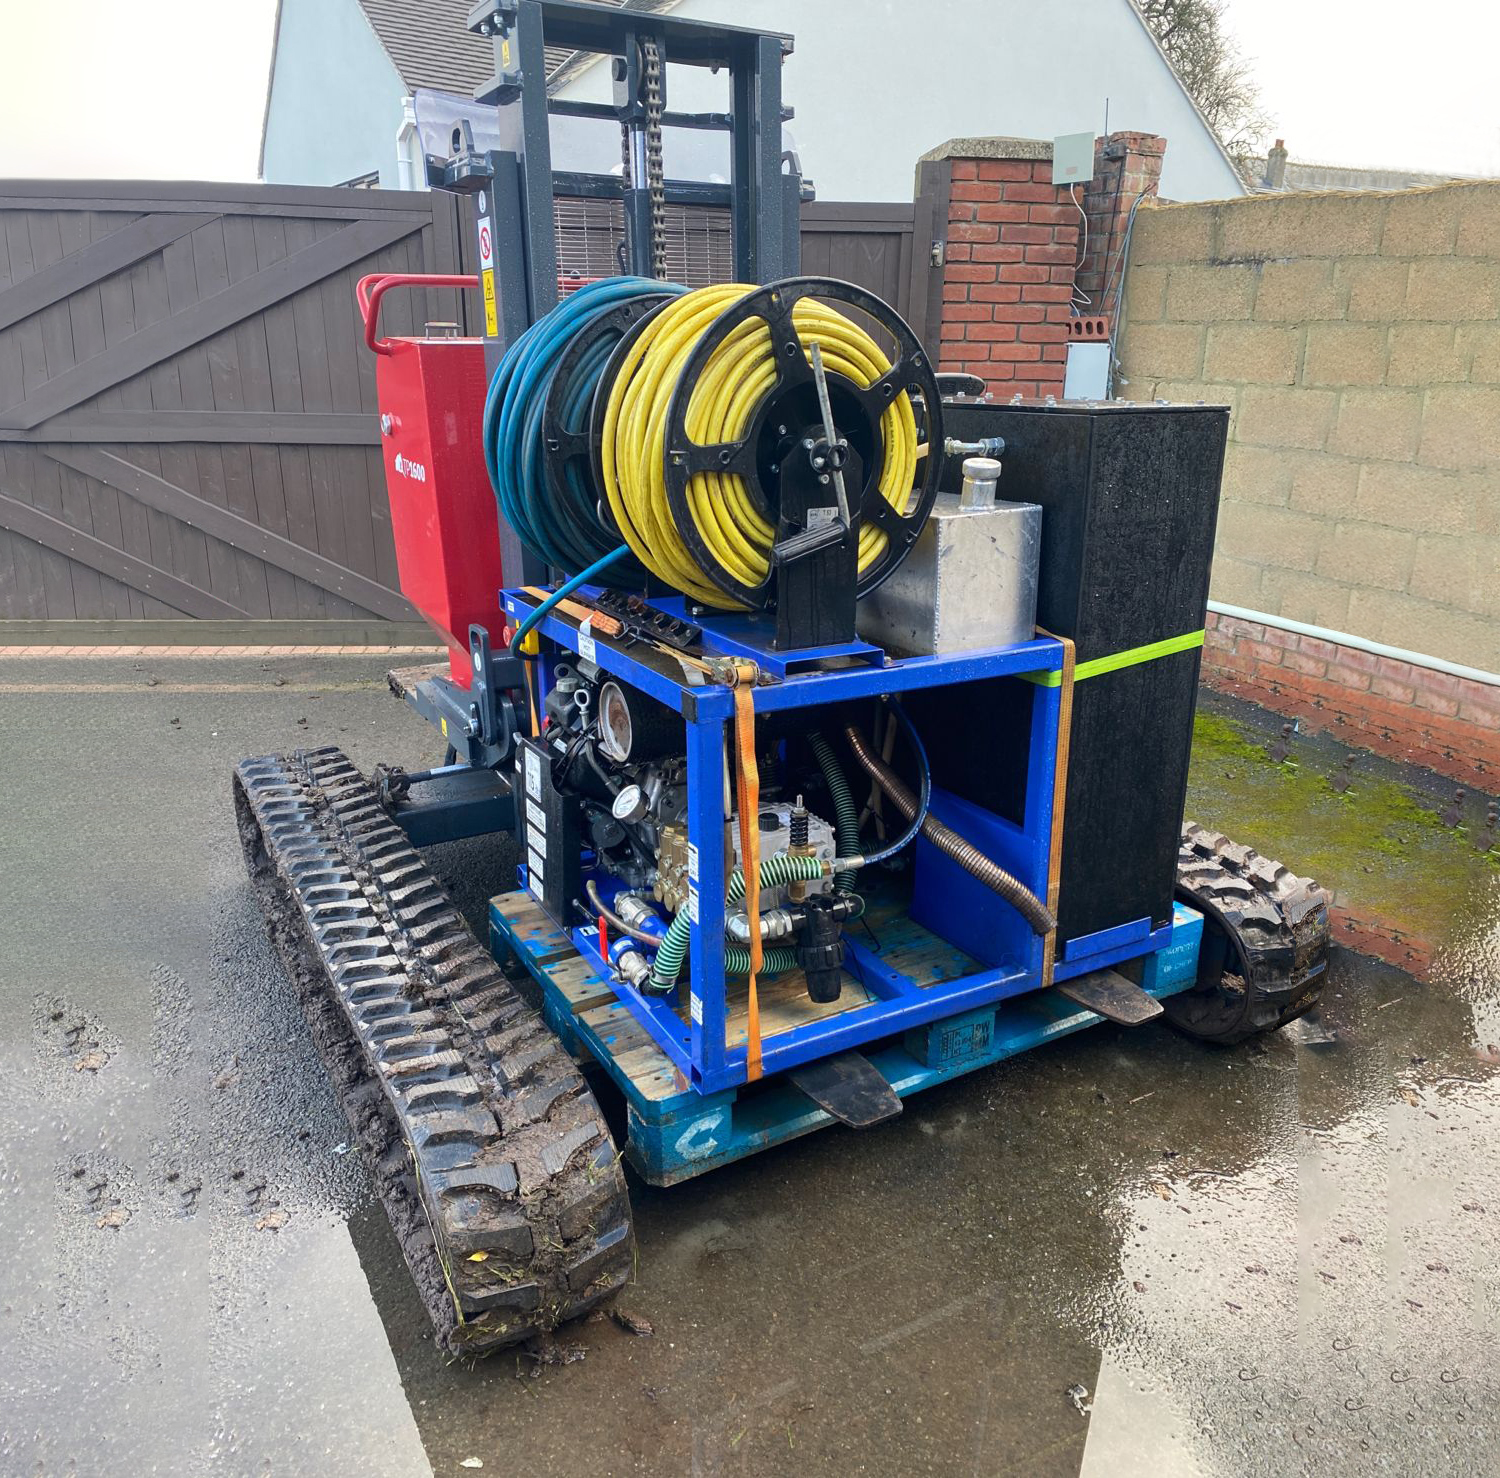 Tracked forklift transforms material moving for drainage specialist